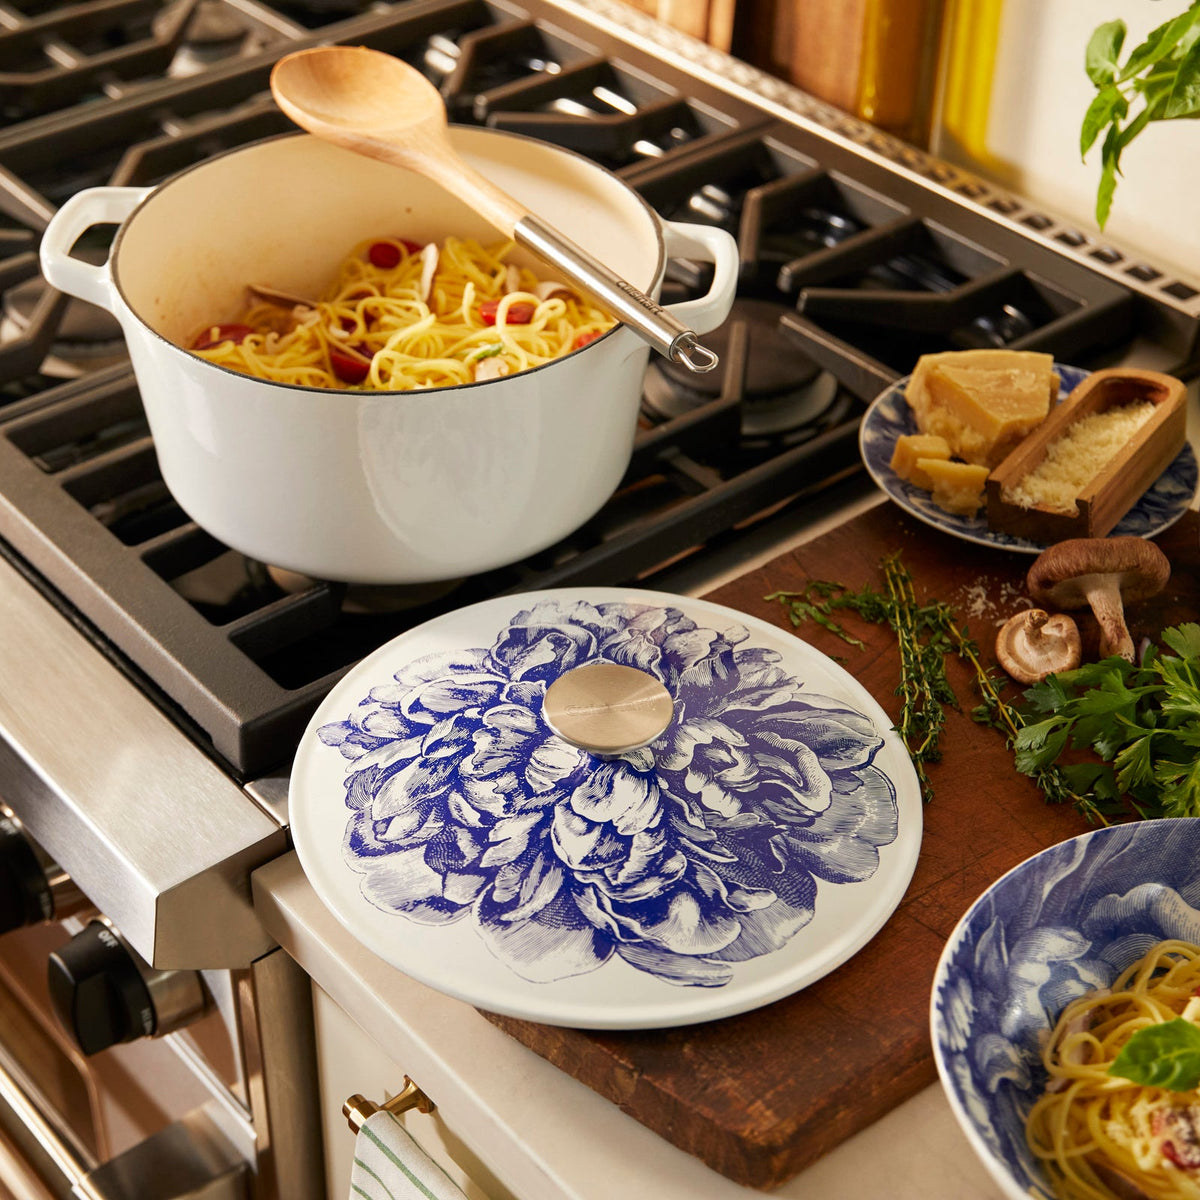 Peony Cast Iron Enamel Round Casserole with lid in Classic Blue and White from the Caskata X Cuisinart Limited Edition Collection